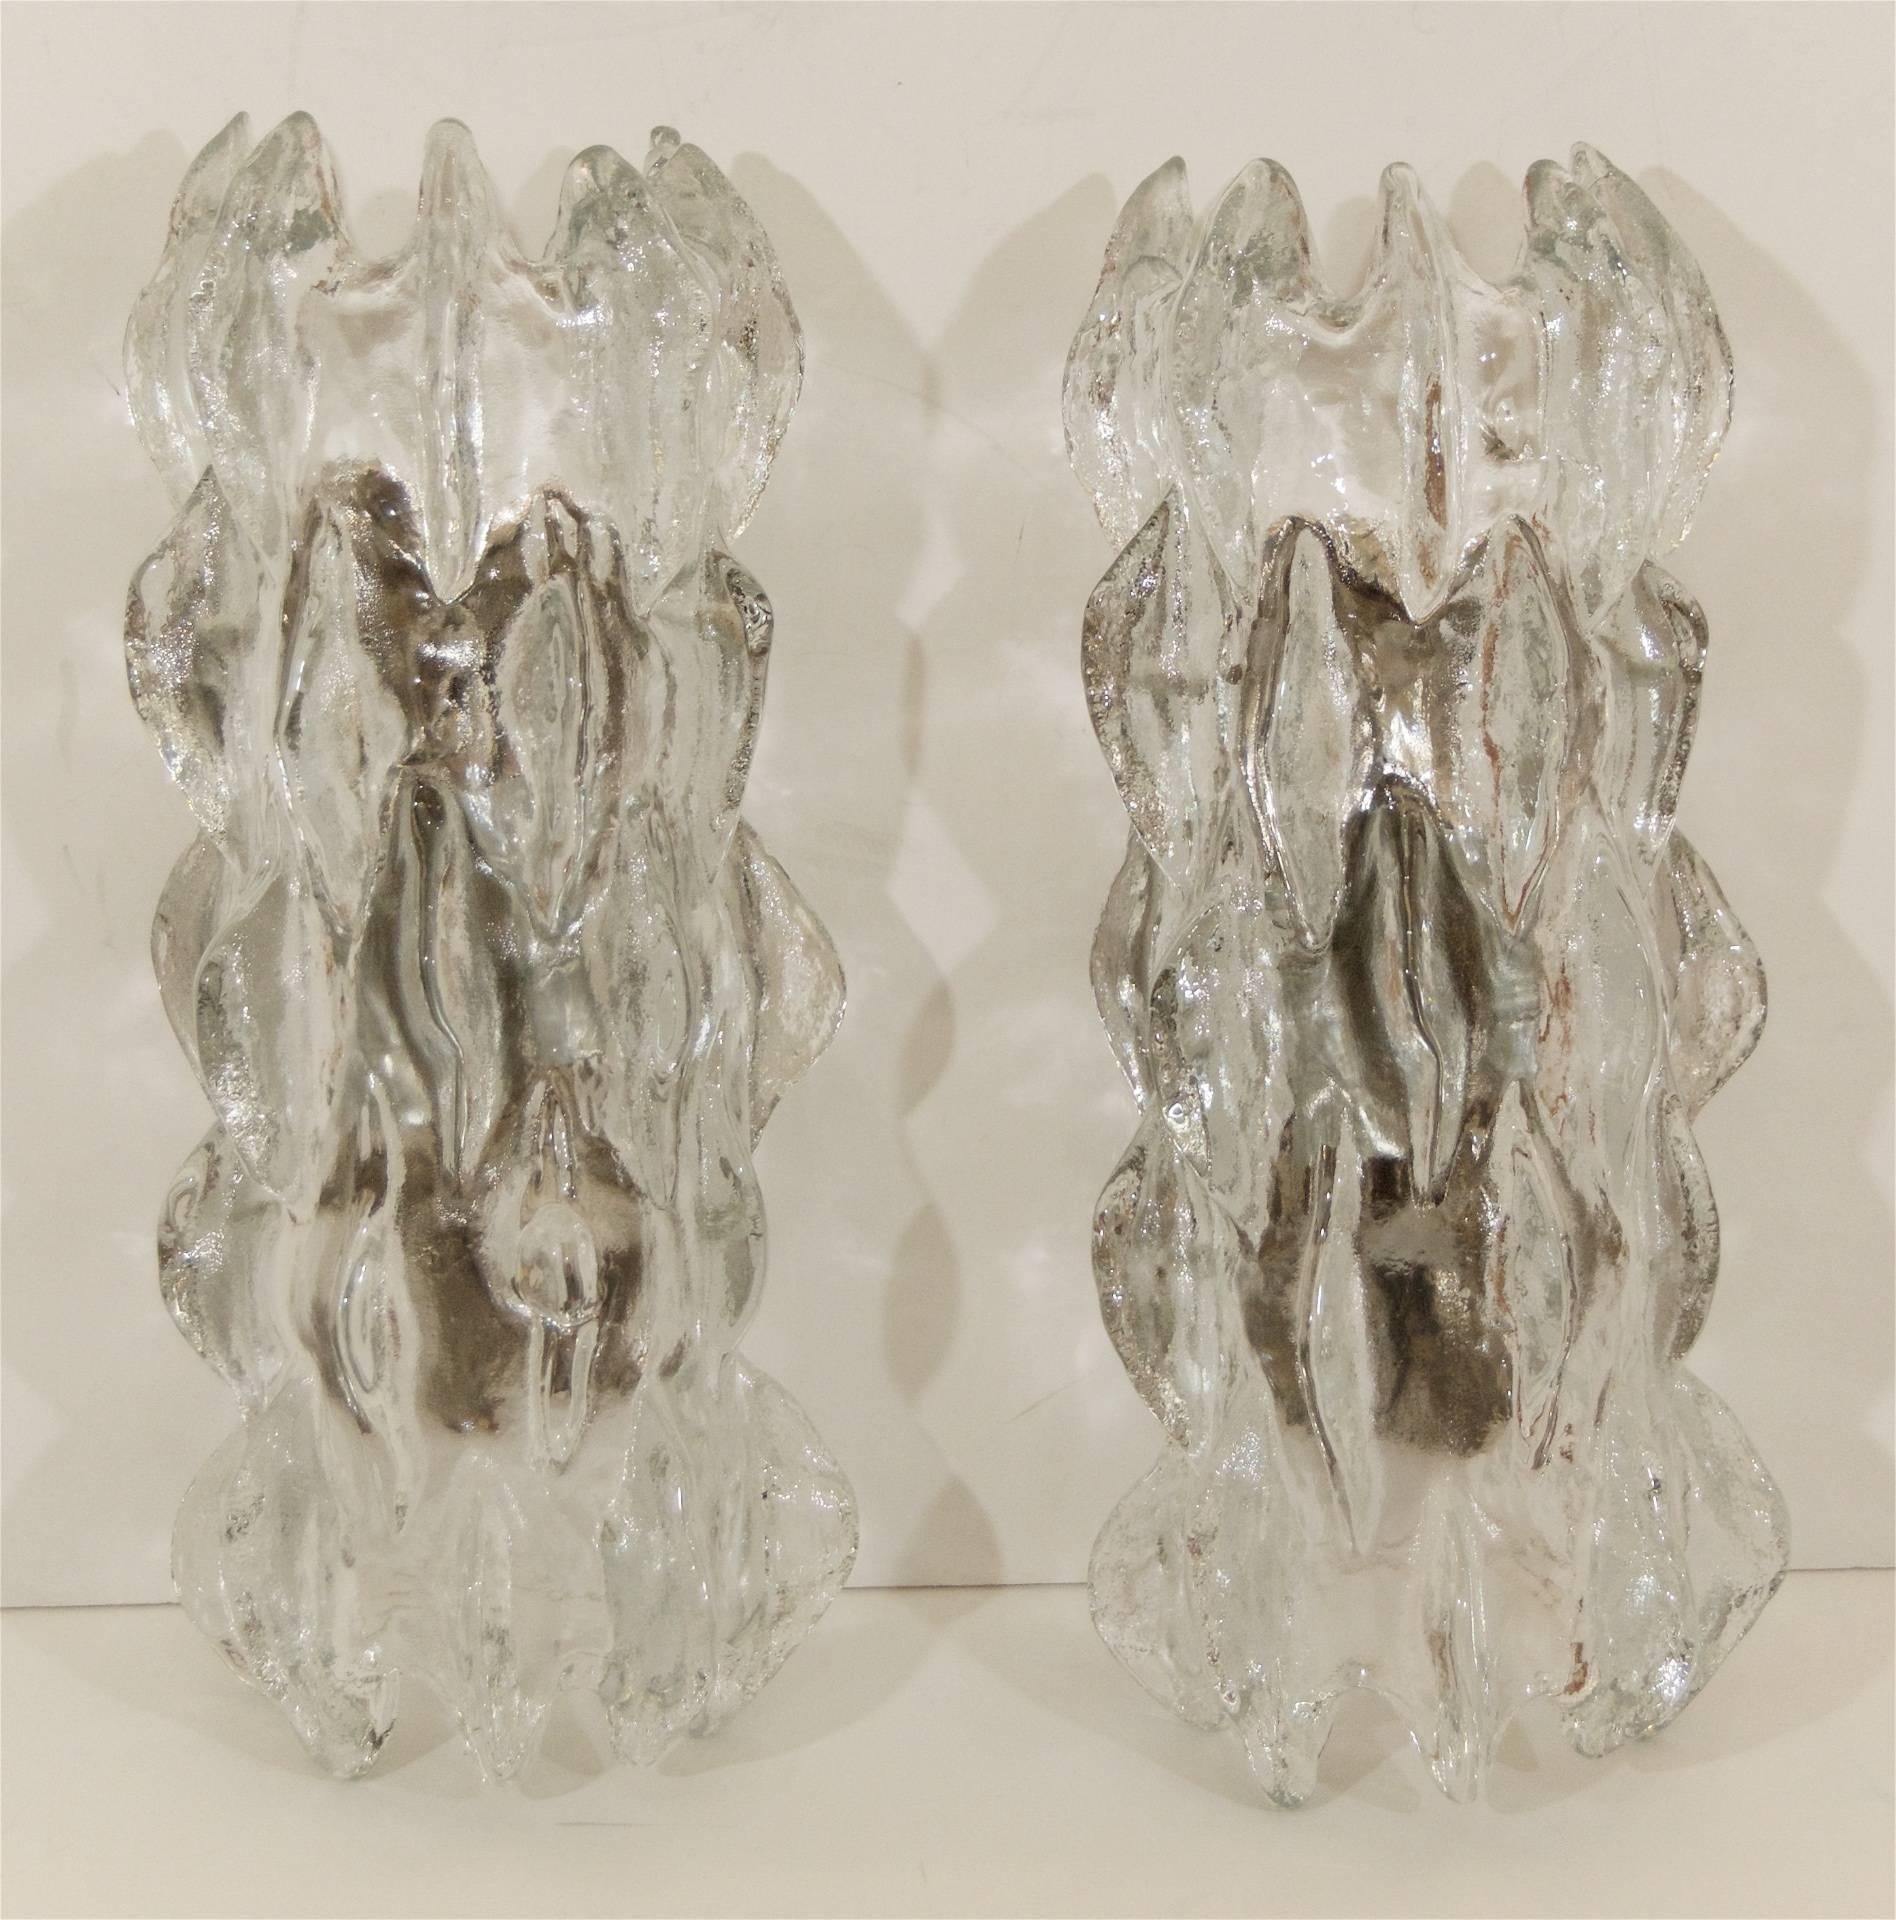 Grand scale Kalmar sconce comprised of a single piece of heavily textured ice glass in serrated and crested wave forms. 

Takes 2 E-14 base bulbs up to 40 watts per bulb. New wiring. 

Price is for SINGLE sconce at half price - PLEASE NOTE CONDITION.